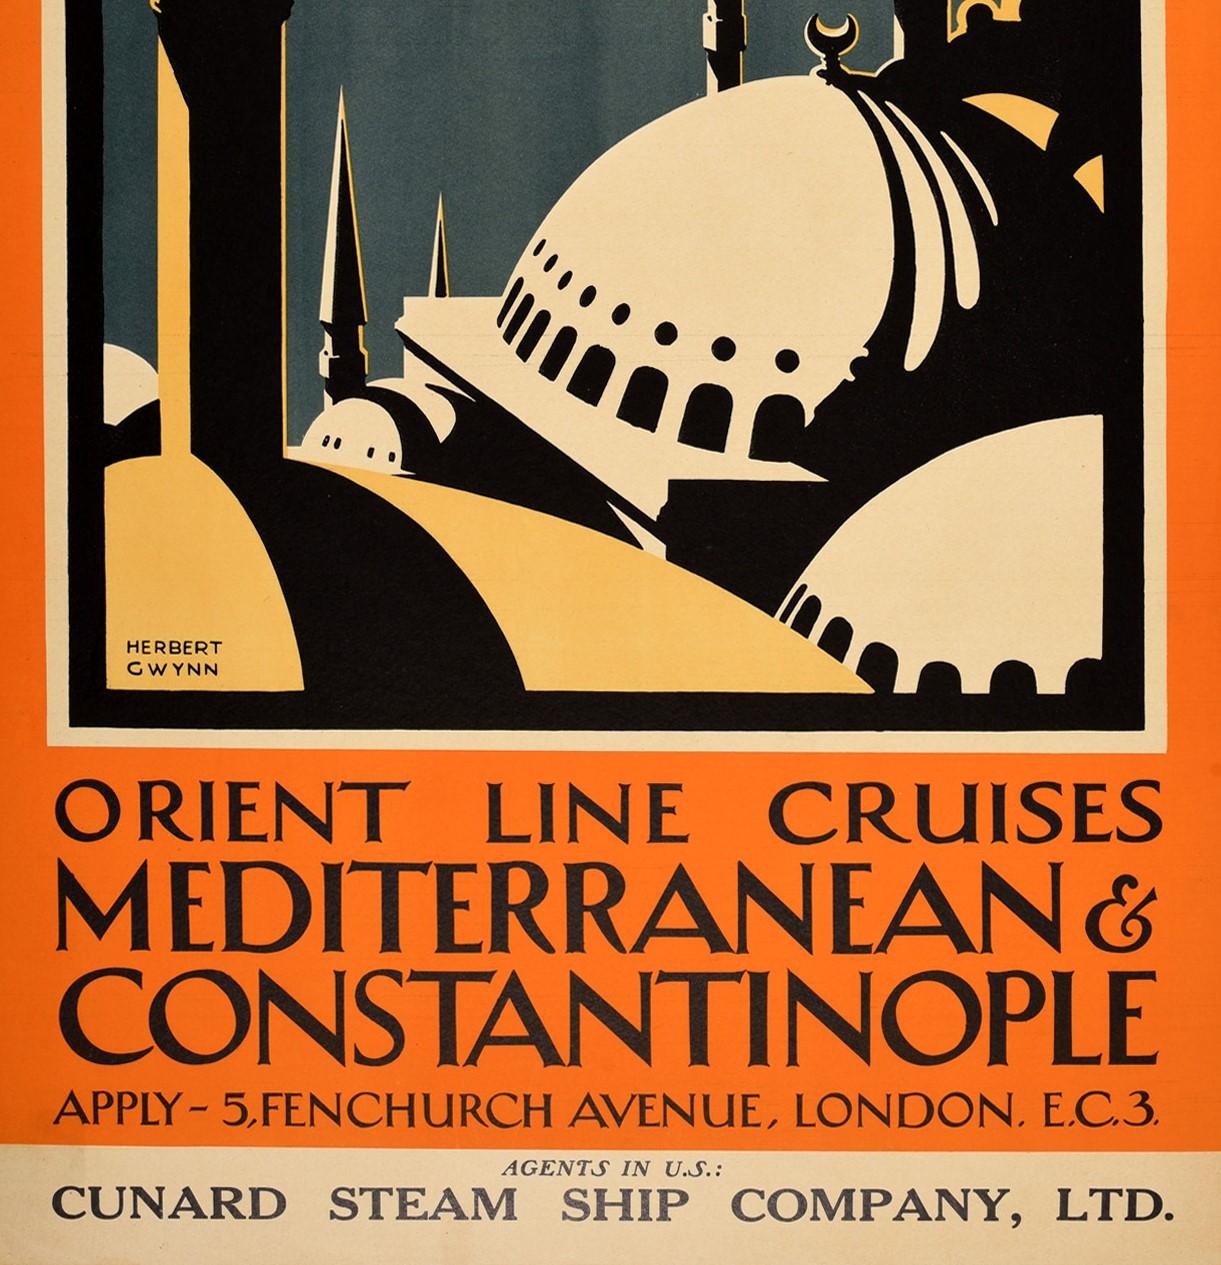 constantinople poster